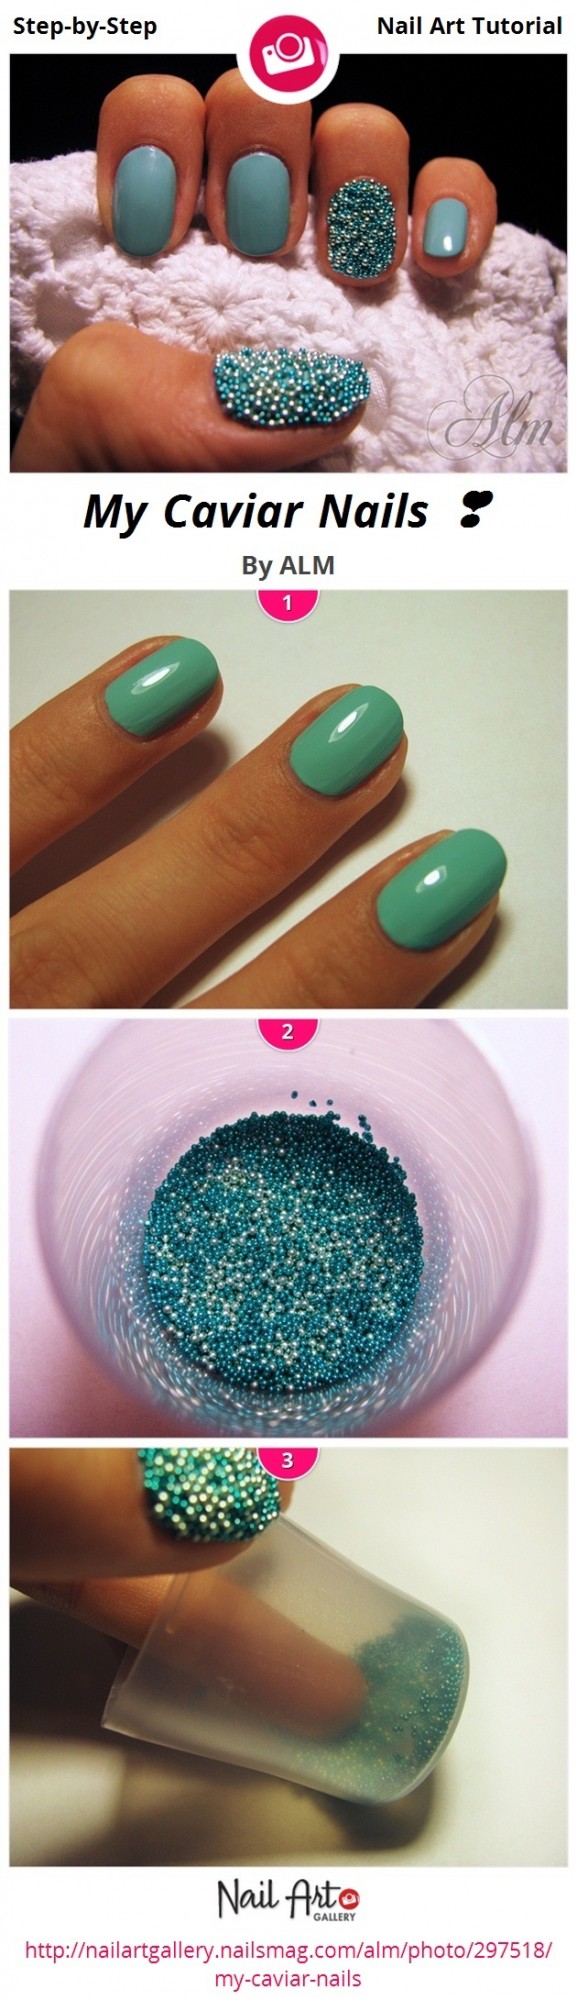 22 New Nails Tutorials you have to try (19)